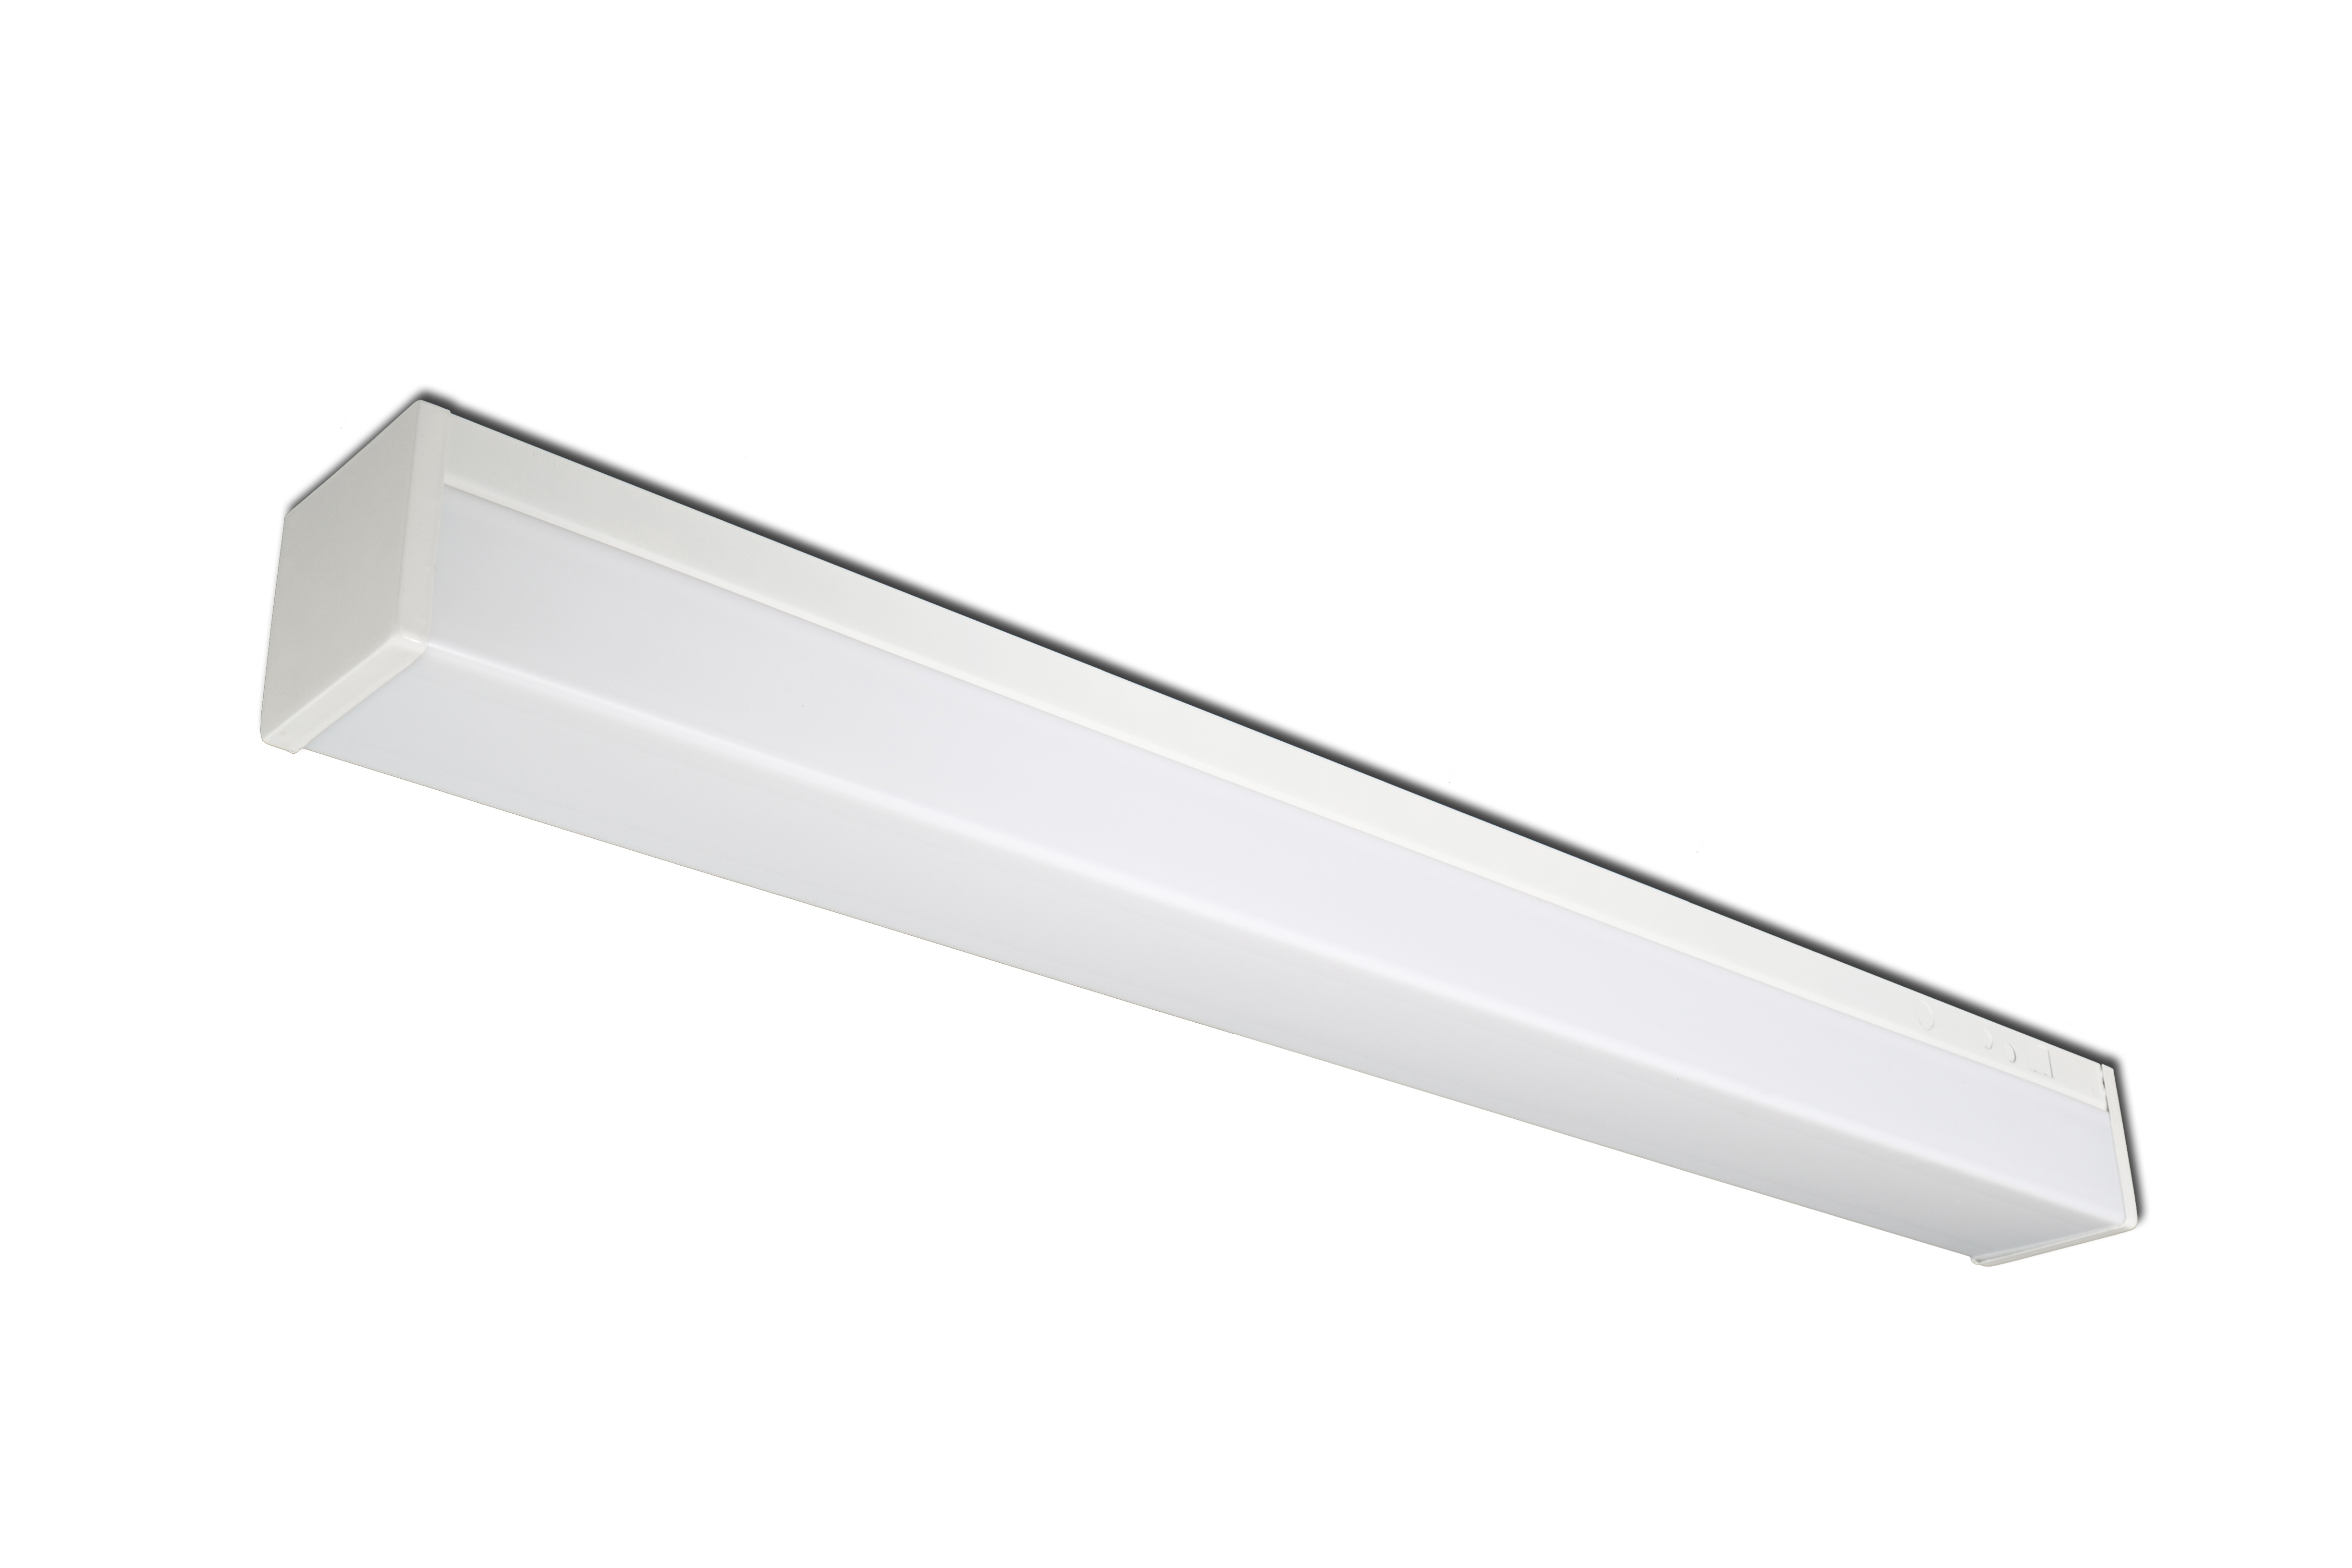 Full Acrylic Diffuser Ceiling/Wall Mount Luminaire